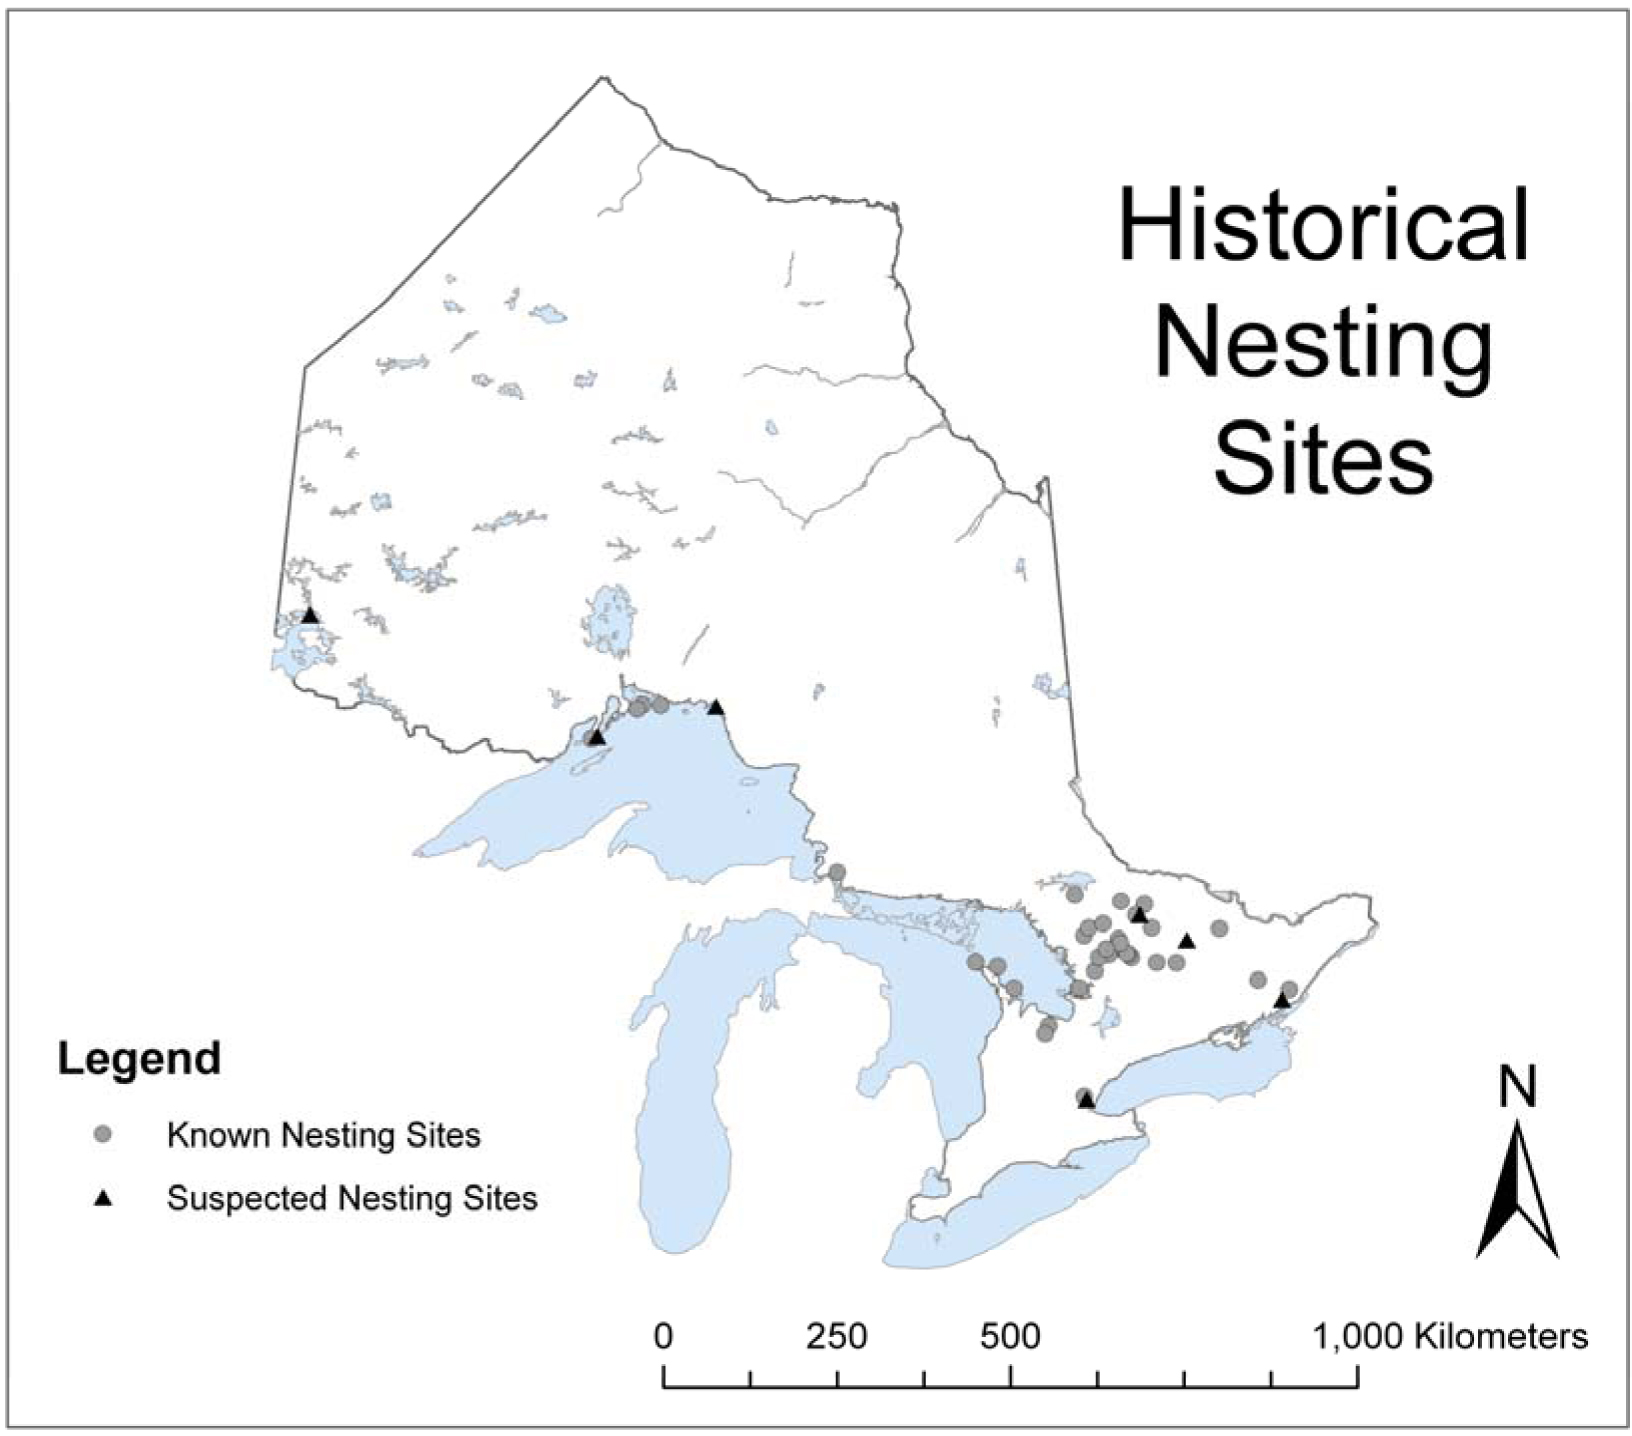 Map showing historical nesting sites of the Peregrine Falcon in Ontario, including known nesting sites and suspected nesting sites.